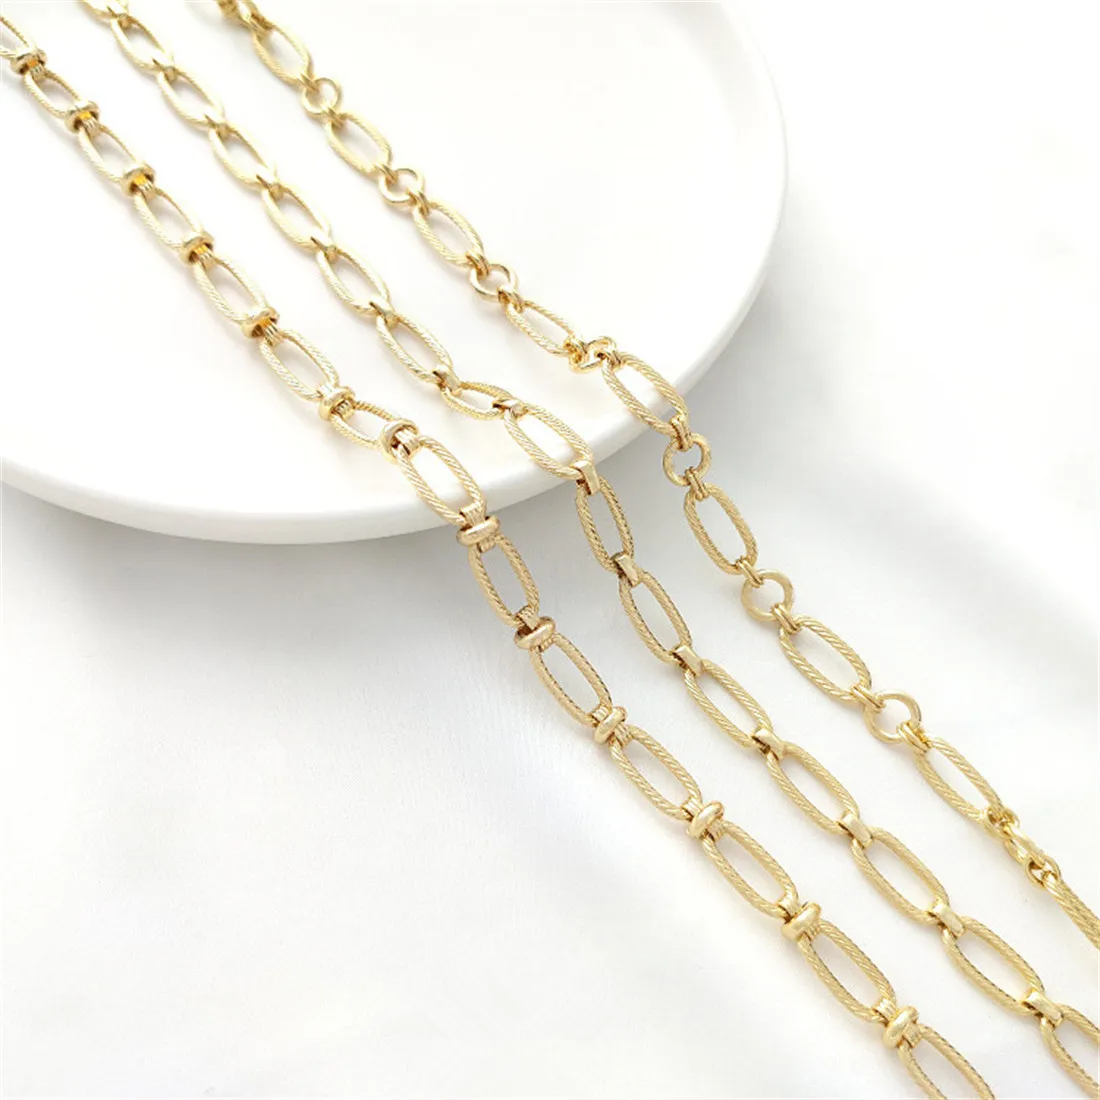 14K Gold Wrapped Oval Fried Dough Twists Chain Manual Long O-ring Chain Diy Bracelet Necklace Jewelry Hand Made Loose Chain B671 200pcs 50x70mm gold scratch off sticker diy manual hand made post card coating film